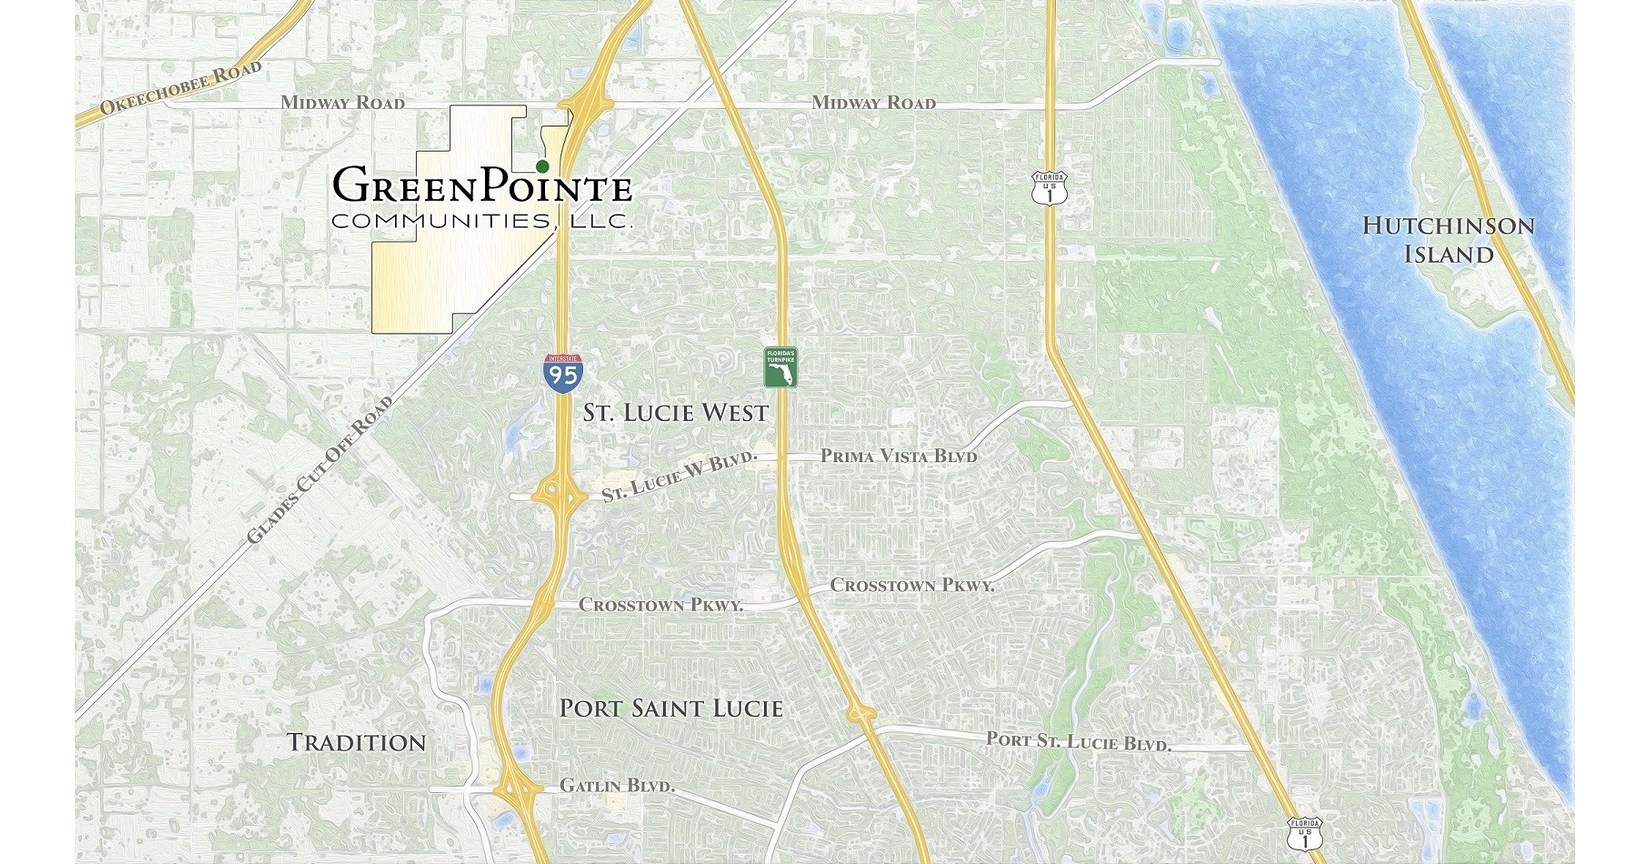 GreenPointe Communities Acquires Western Port St. Lucie Property